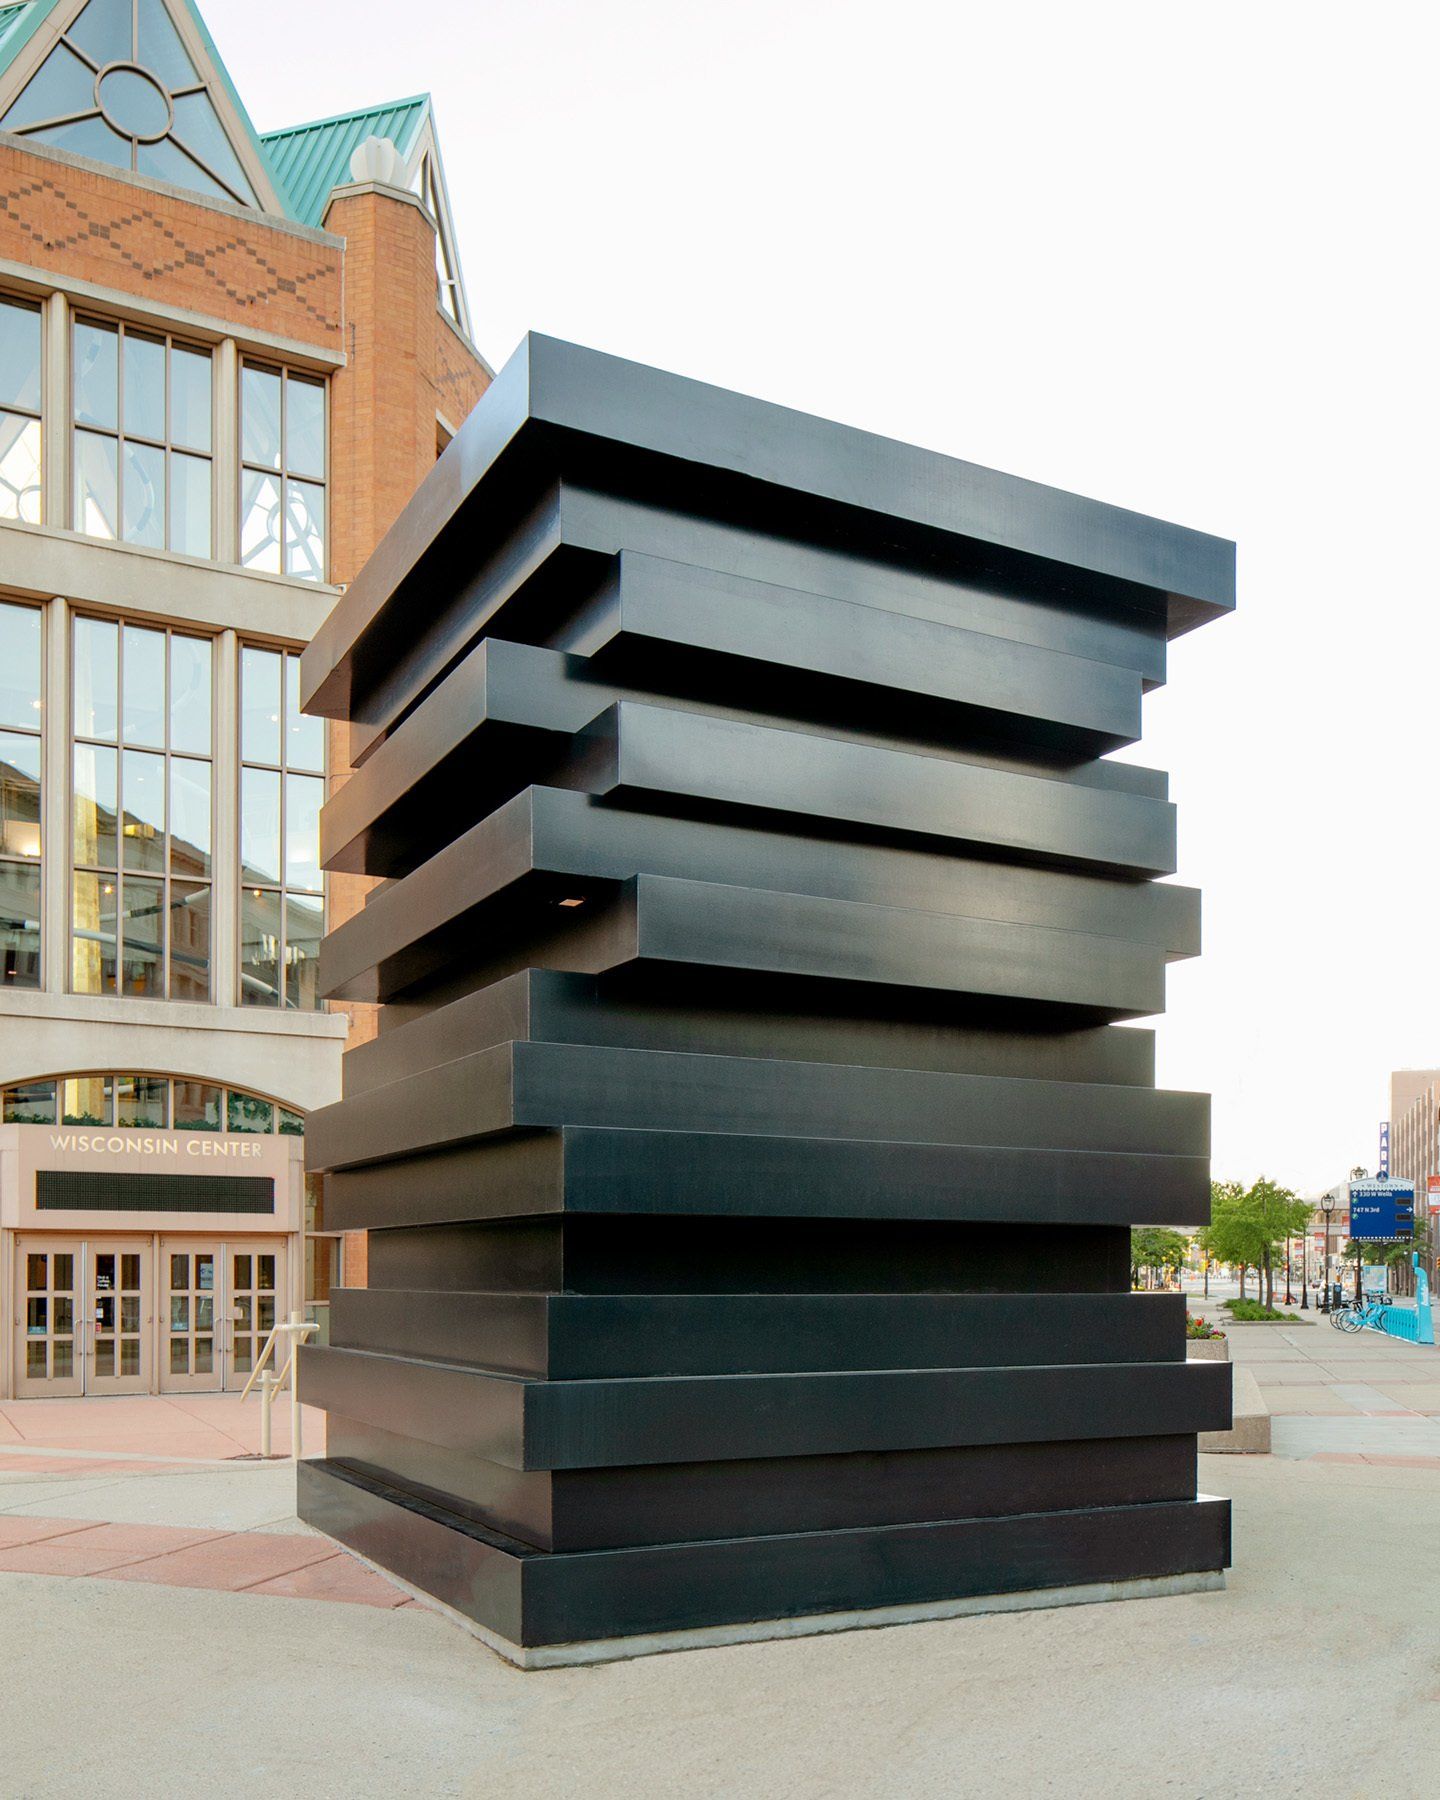 Sean Scully, Black Stacked Frames, Sculpture Milwaukee 2019